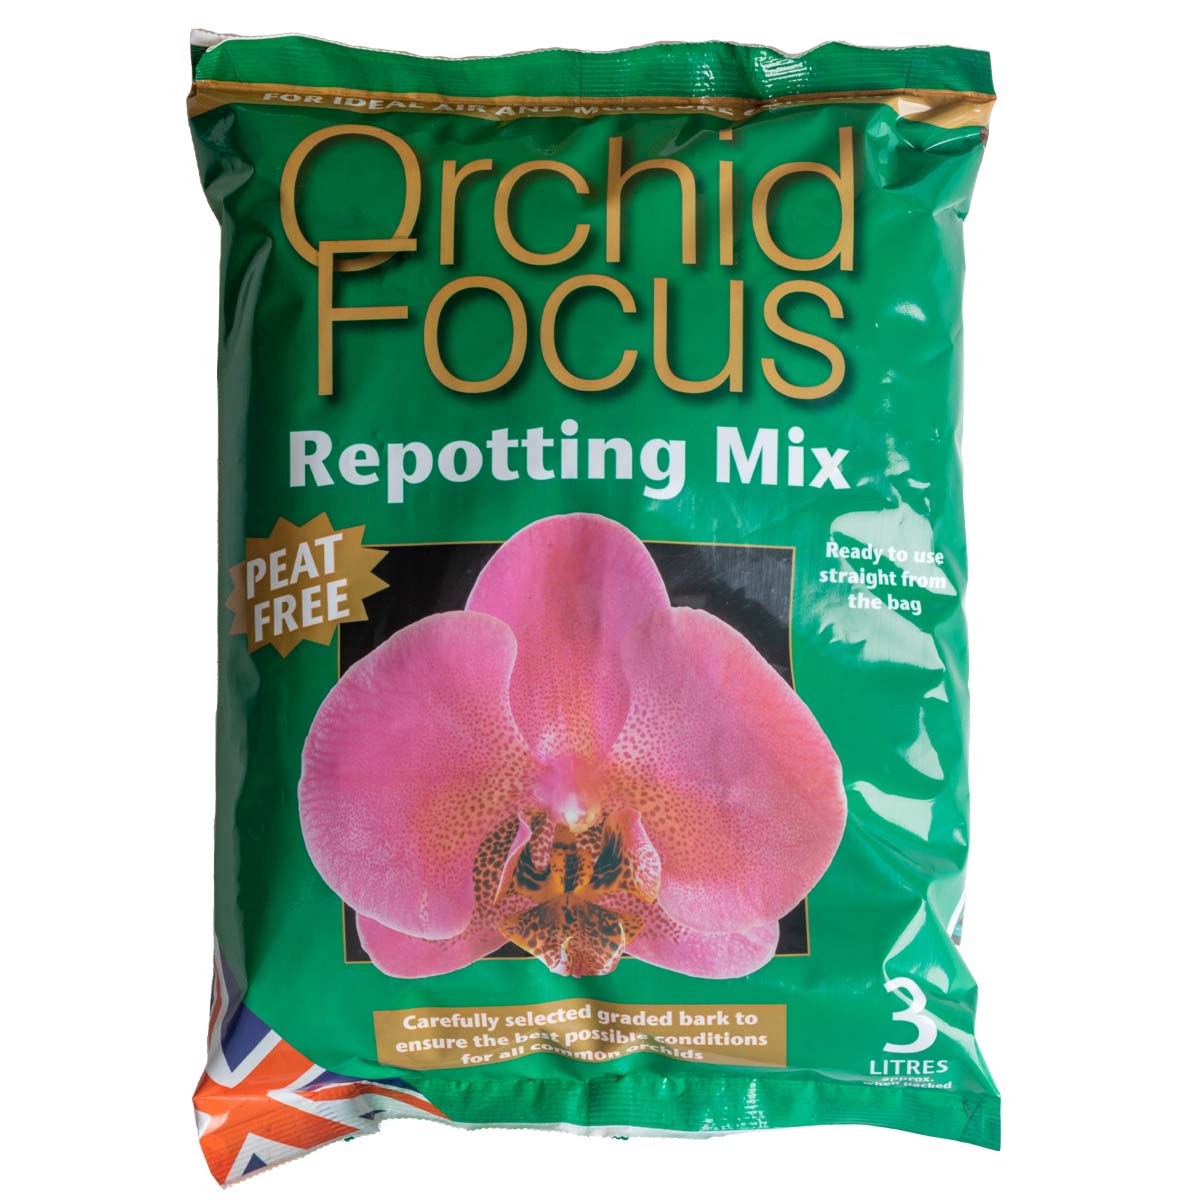 Orchid Focus - Repotting Mix